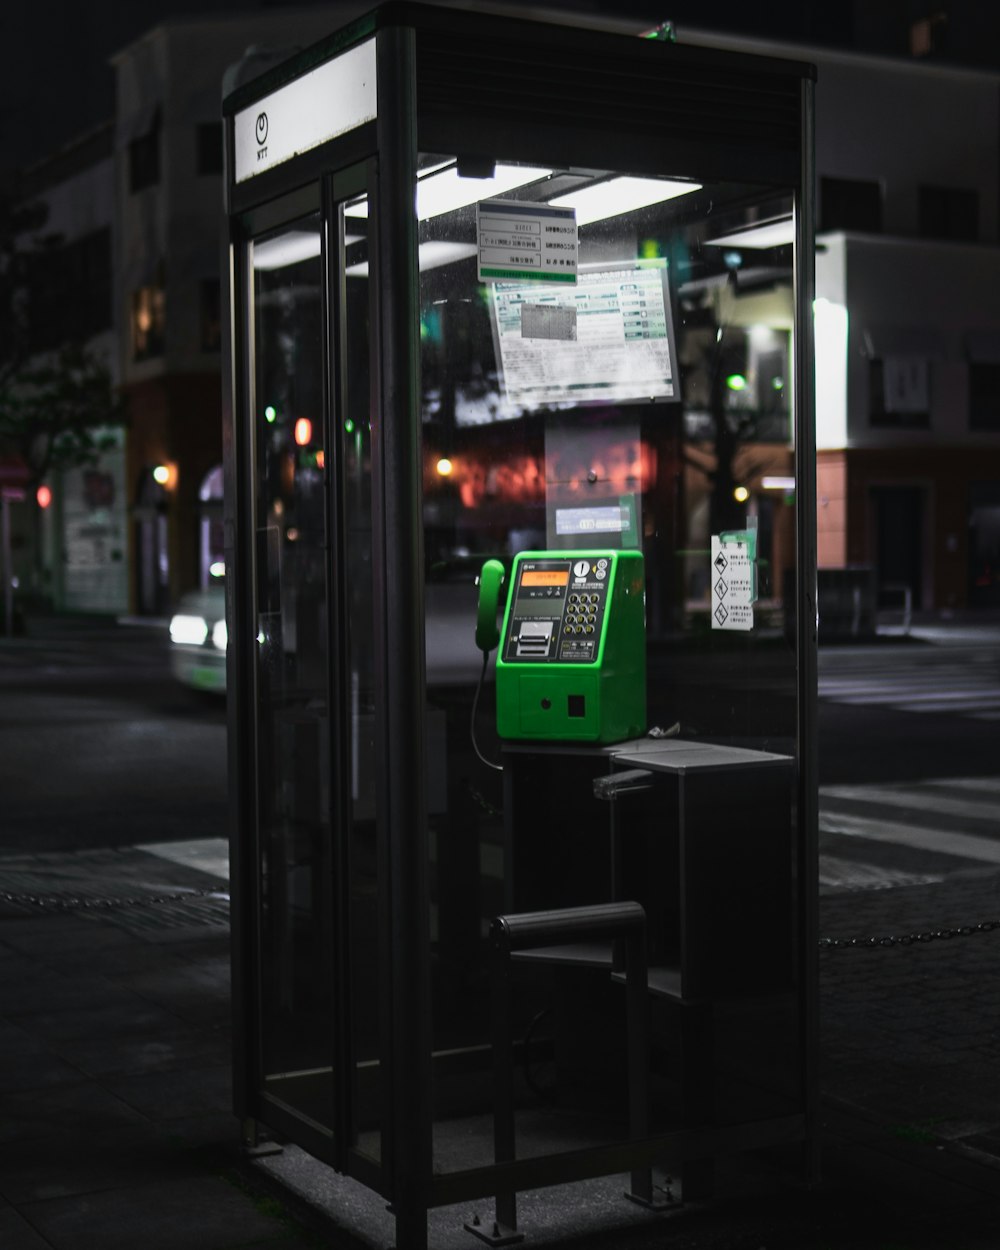 black and green telephone booth outdoor during nighttime